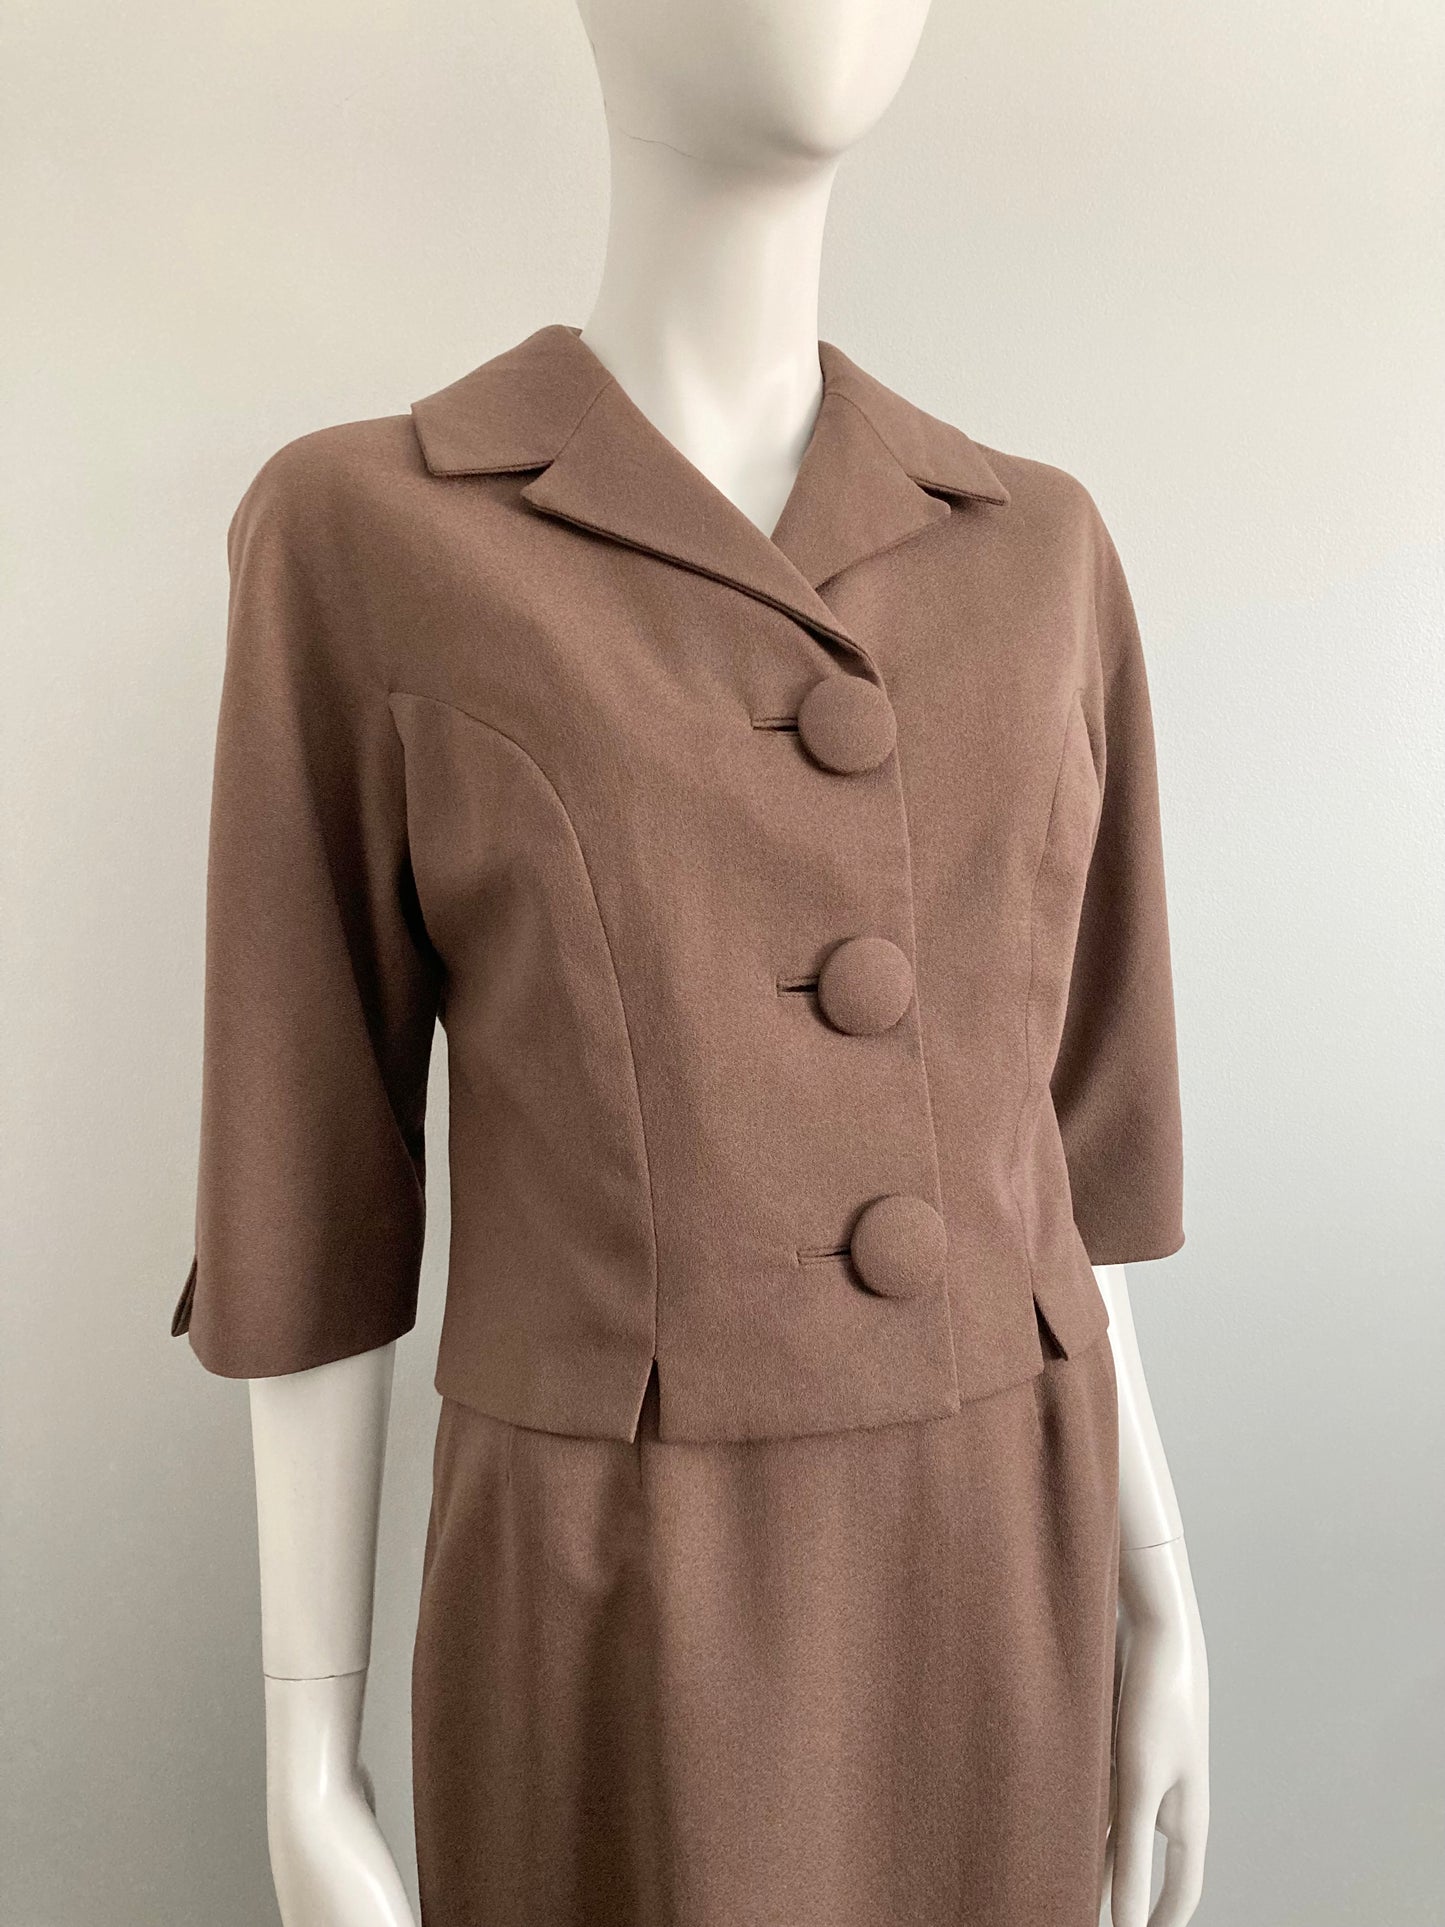 1950s Skirt Suit Set, Matching Jacket and Skirt, Size XS